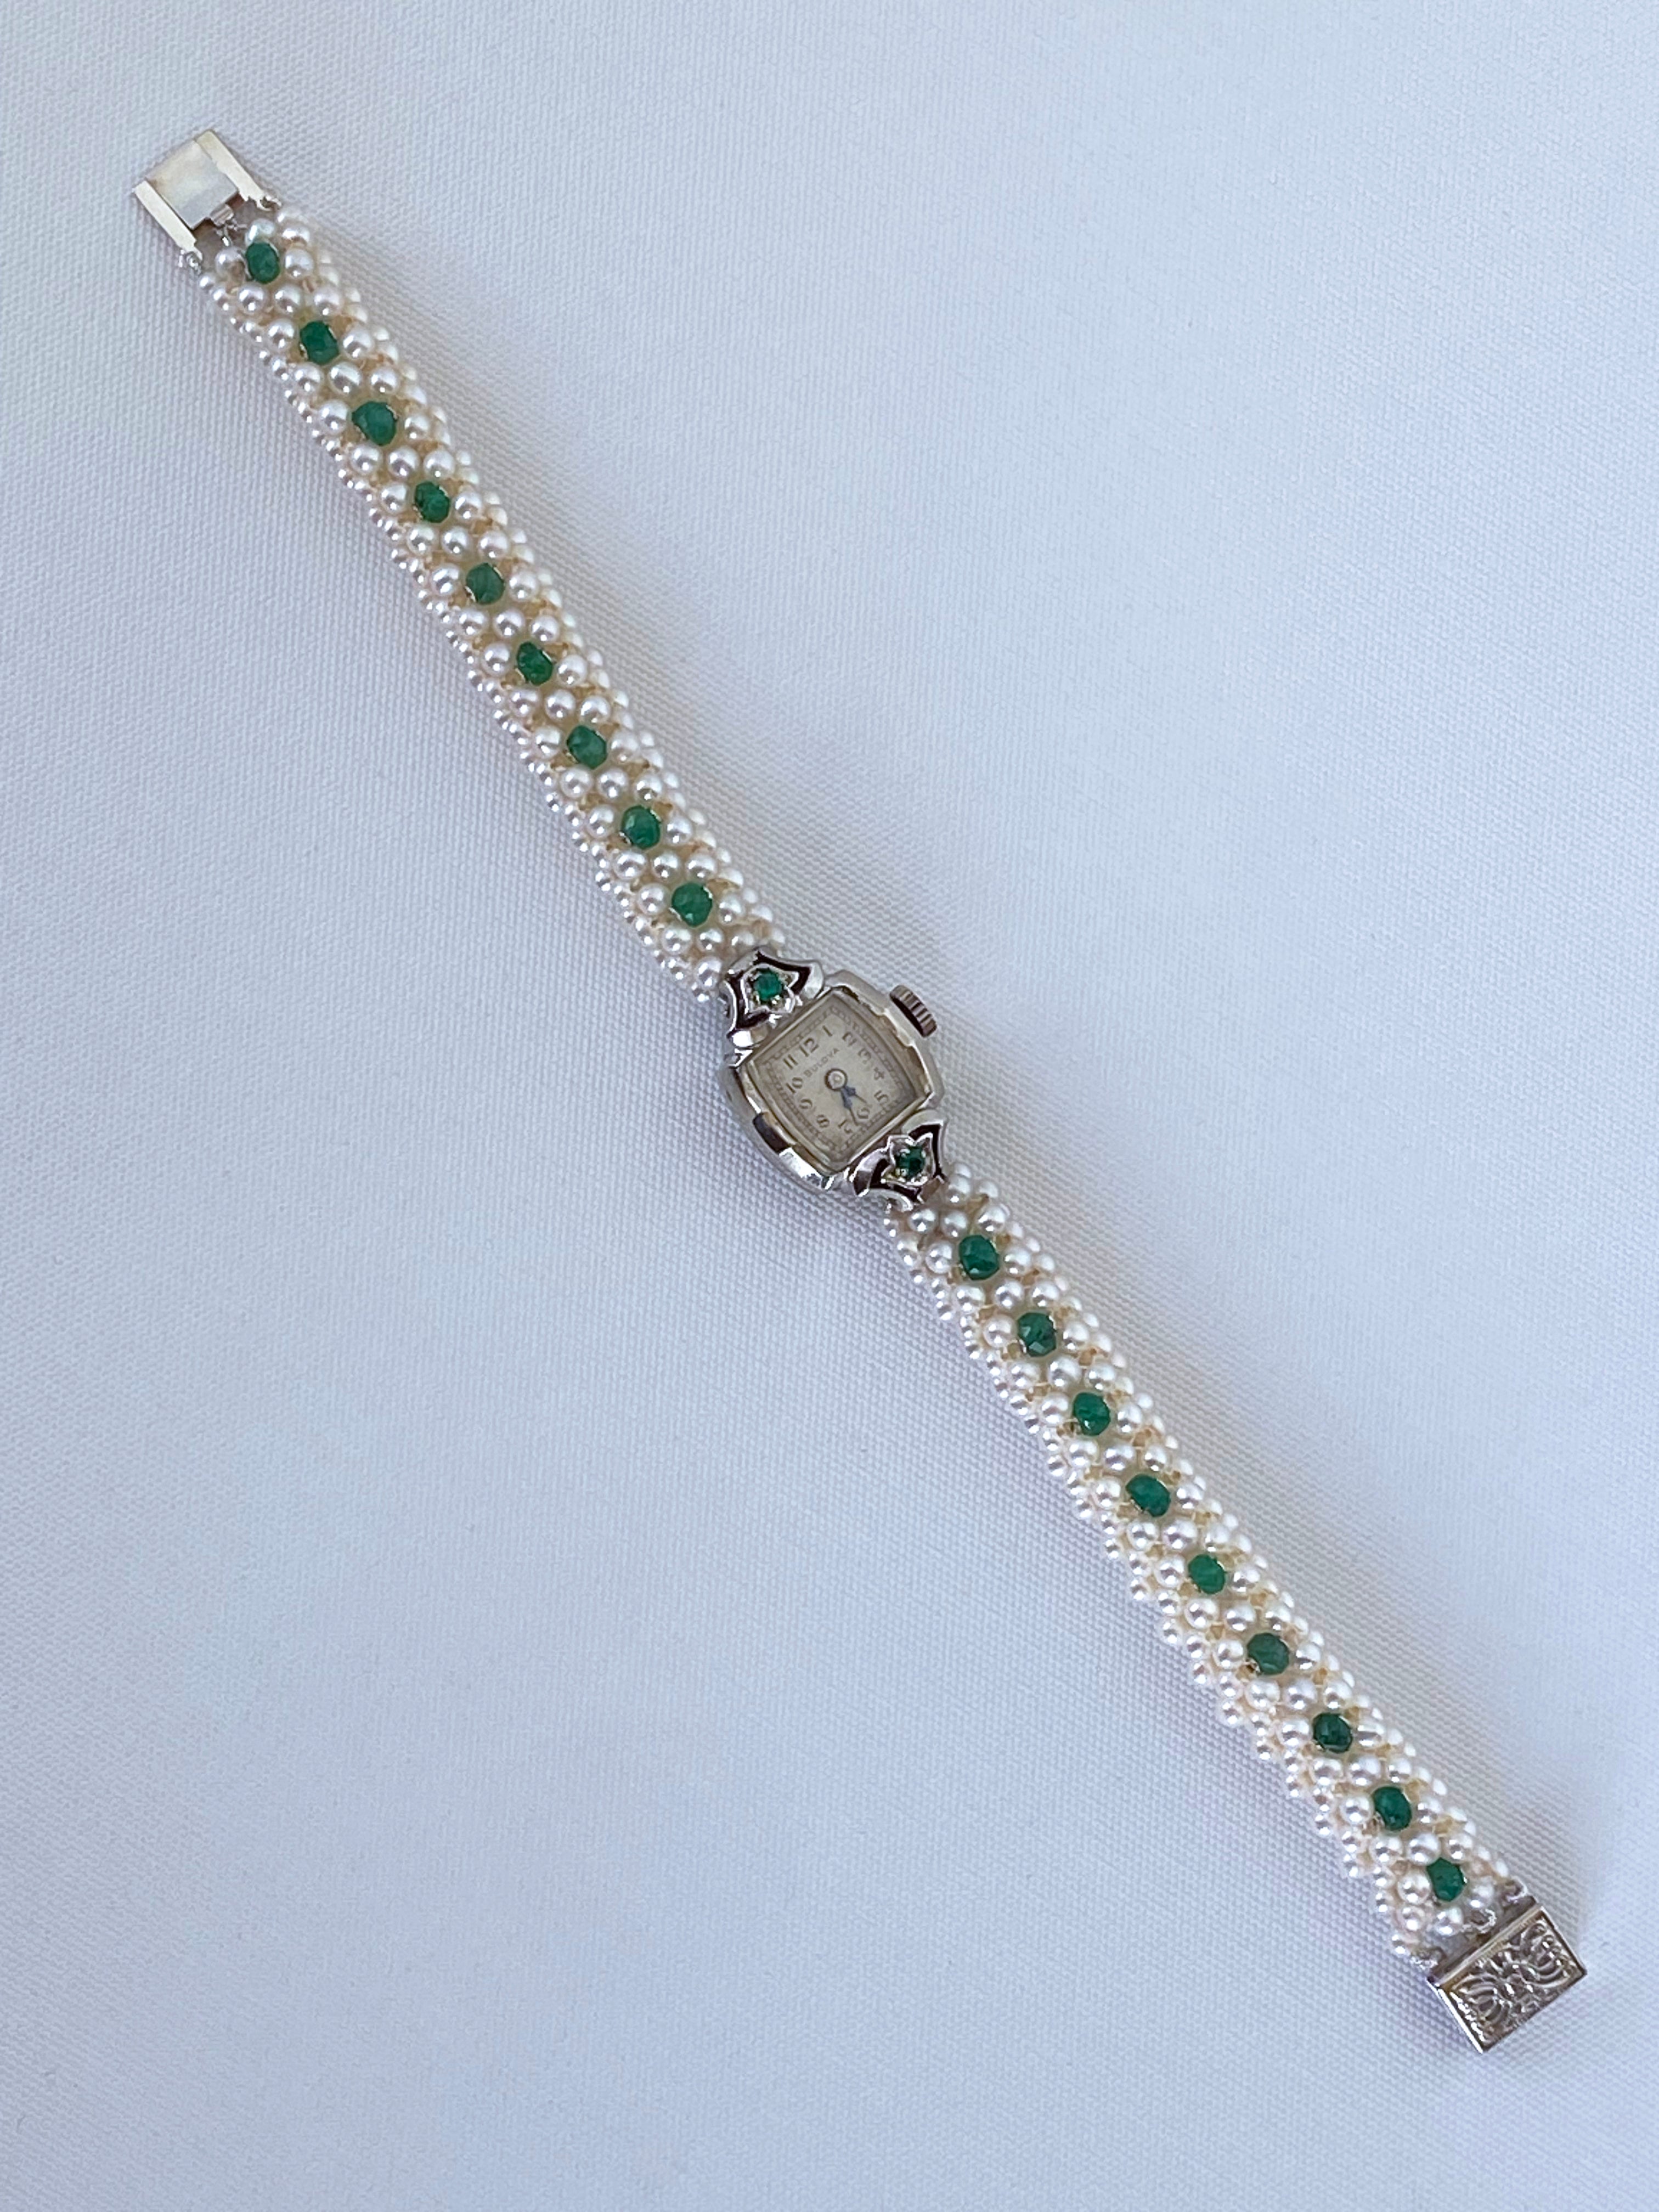 Artisan Marina J. Emerald Encrusted Vintage Watch with Pearls and 14k White Gold For Sale